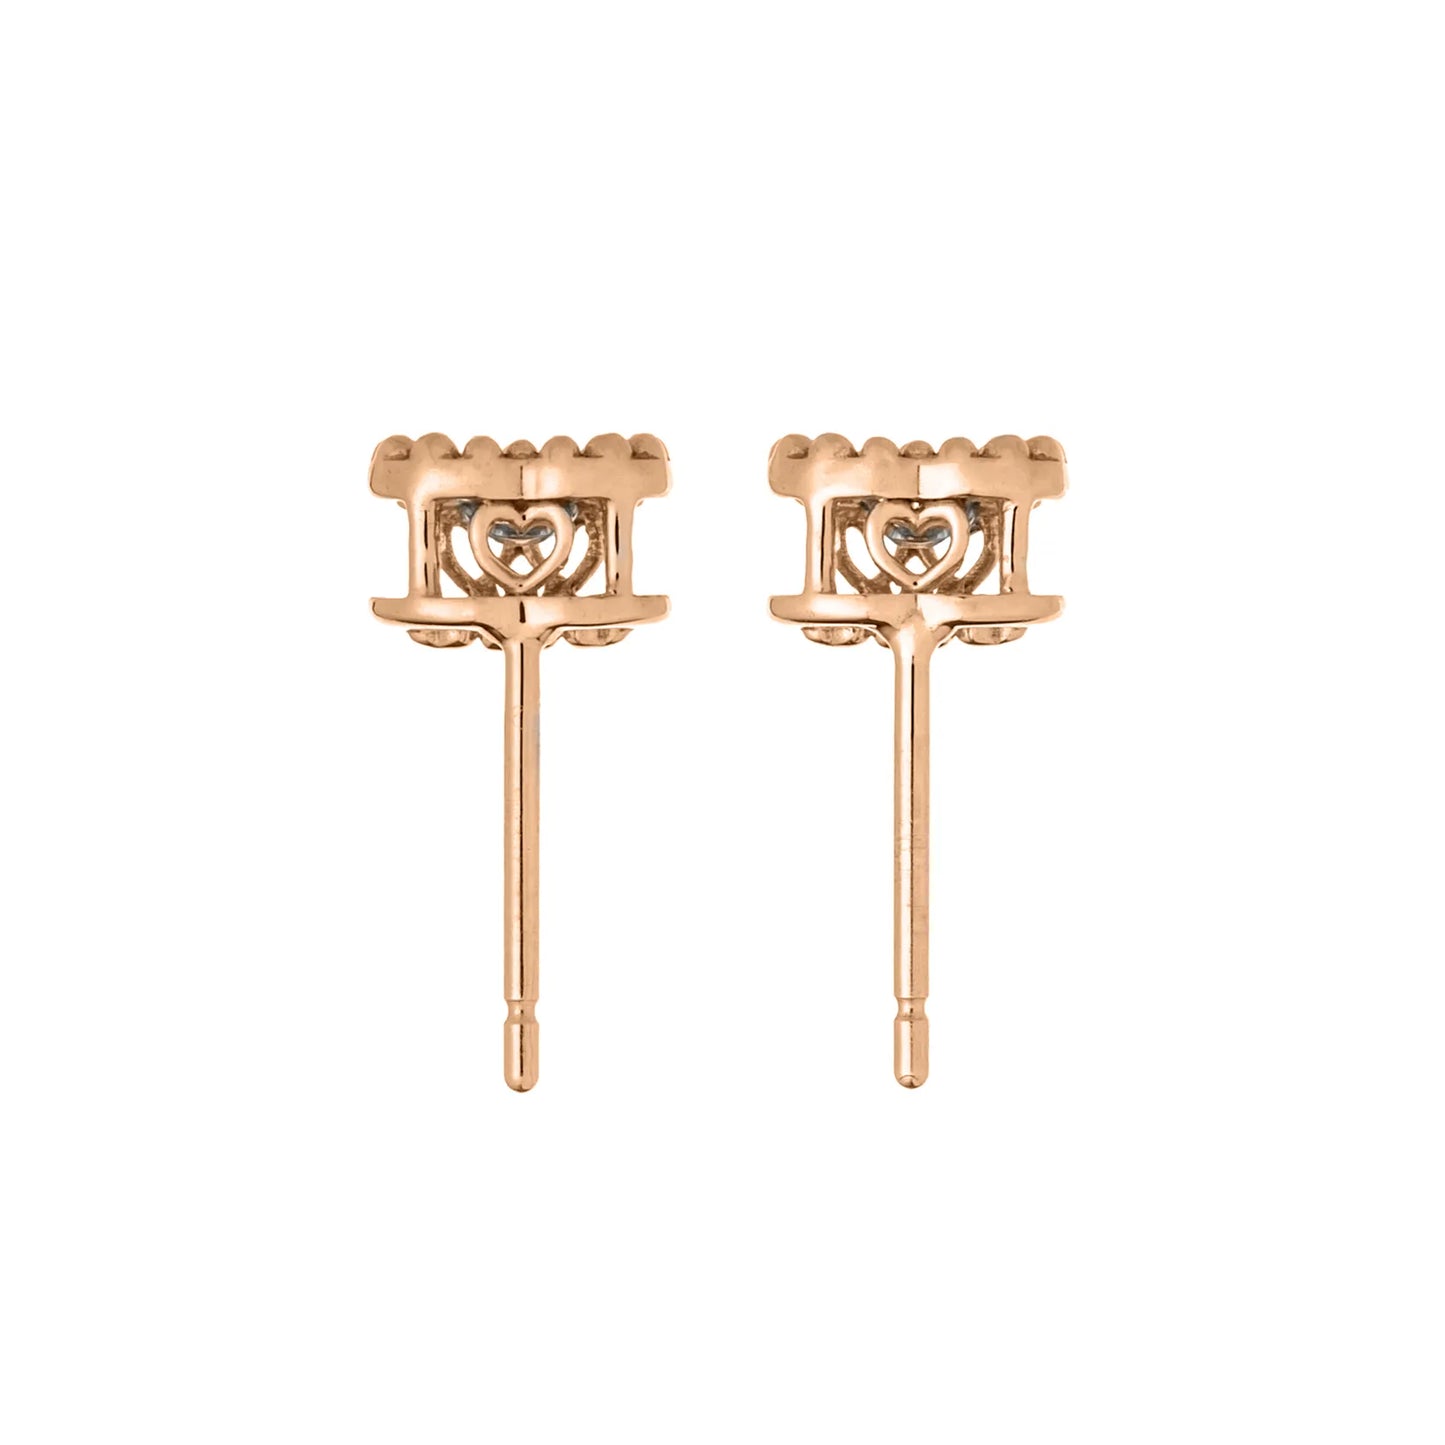 Piercing
(Pink Gold / MTE -0001P10*b)
Love to you